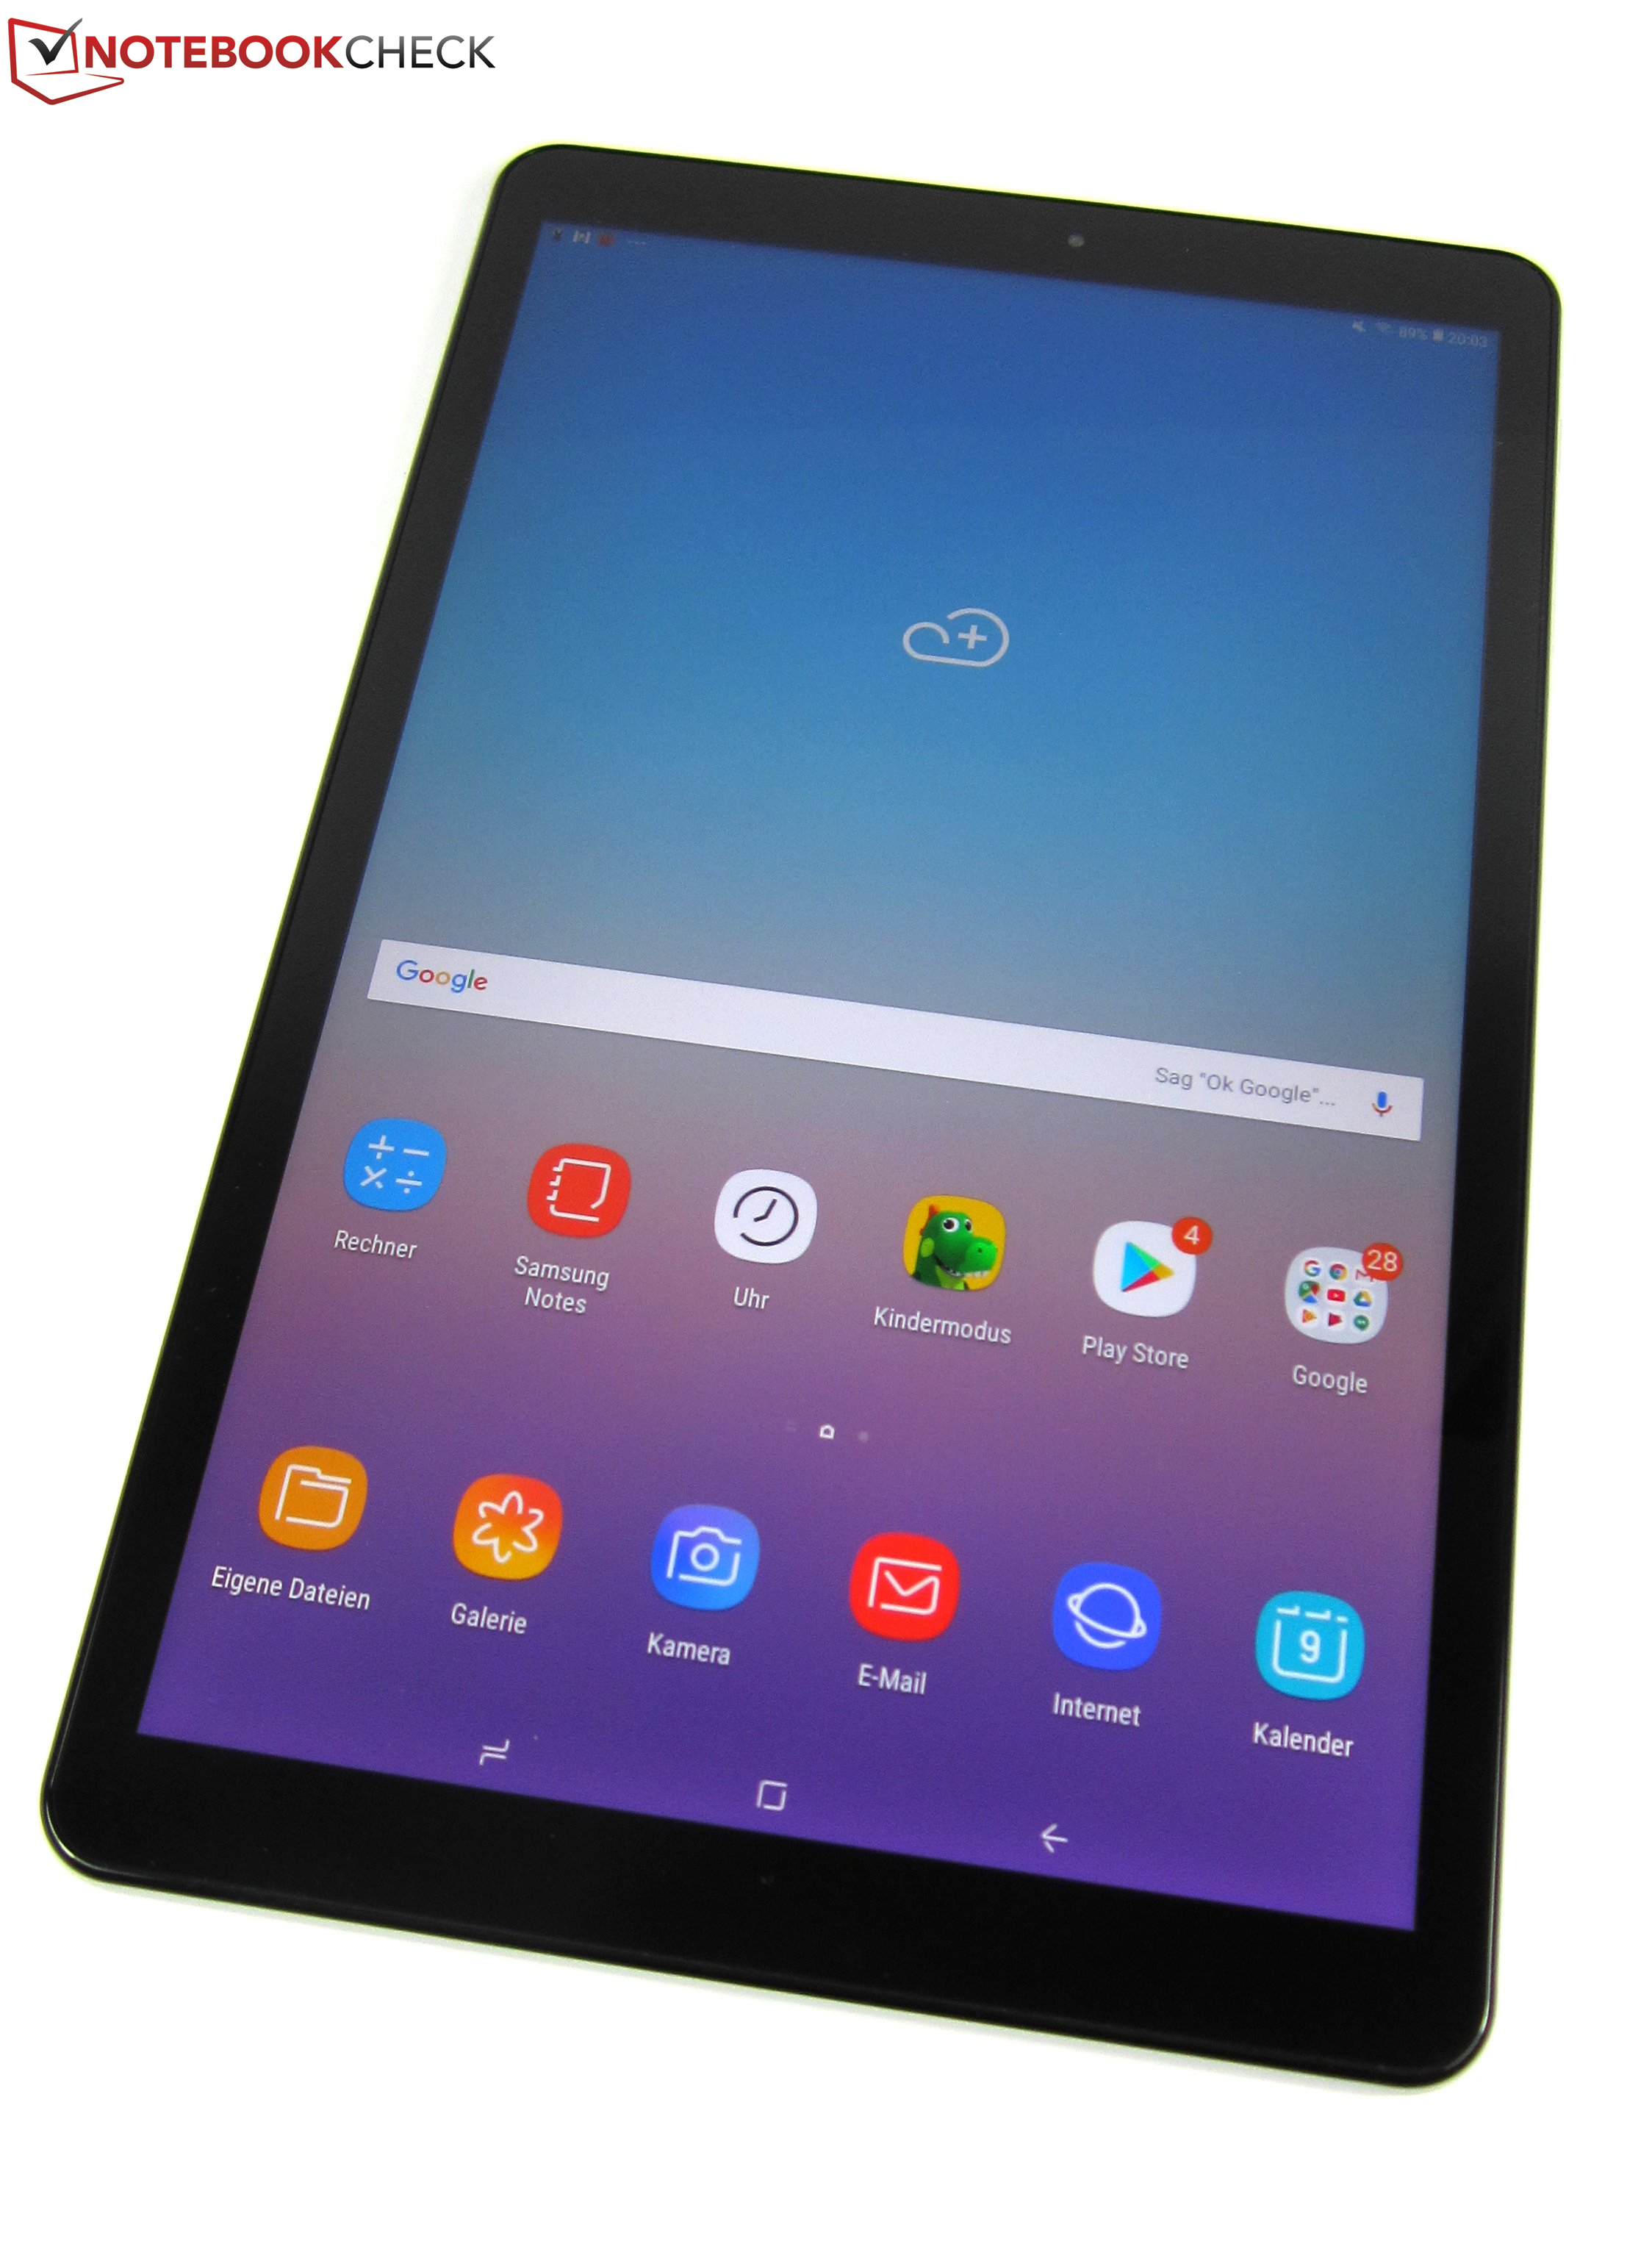 Samsung Galaxy Tab A 10 5 Sm T590n Tablet Review Notebookcheck